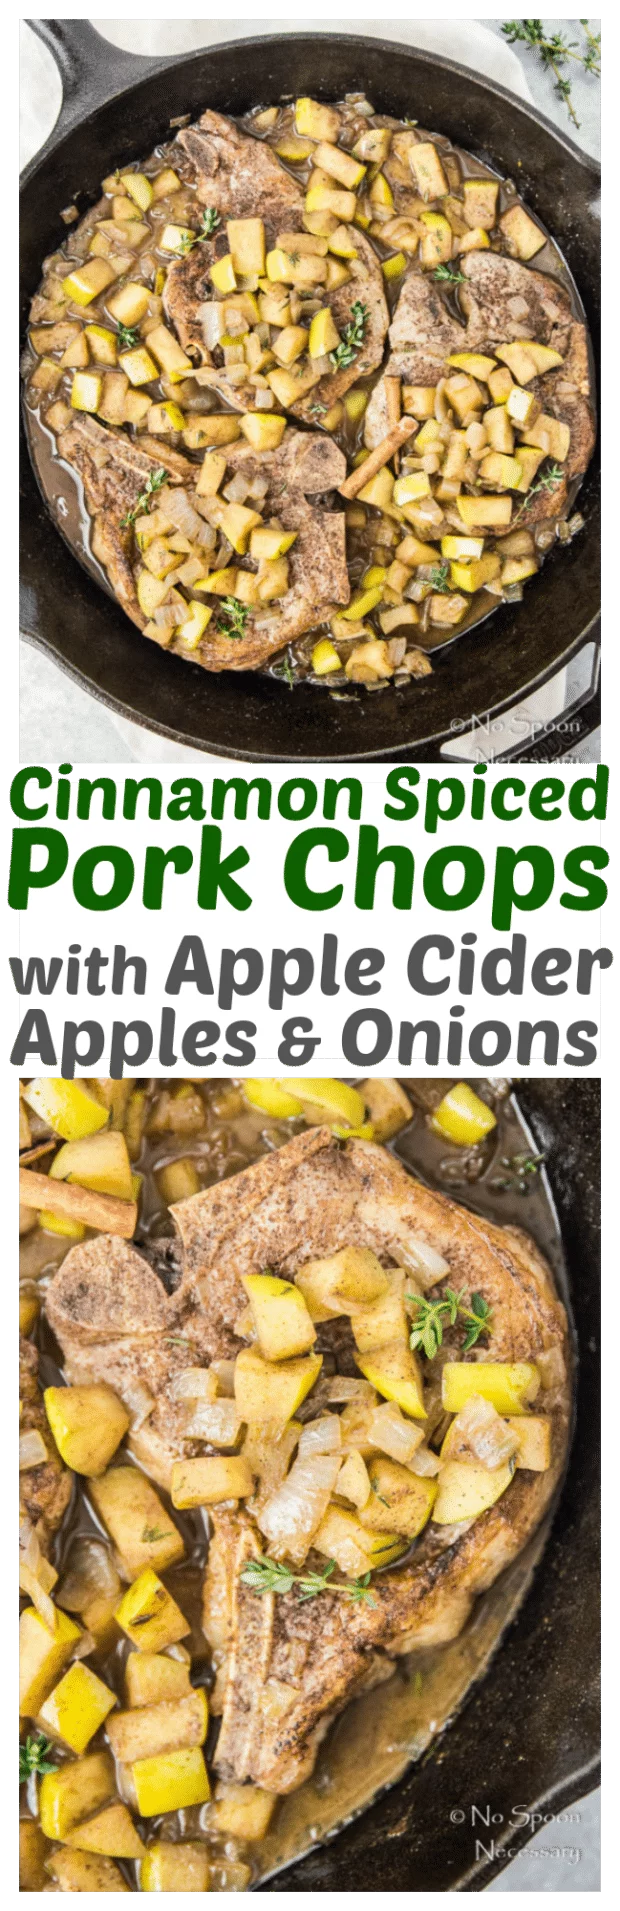 cinnamon-spiced-pork-chops-with-apple-cider-apples-onions-long-pin1